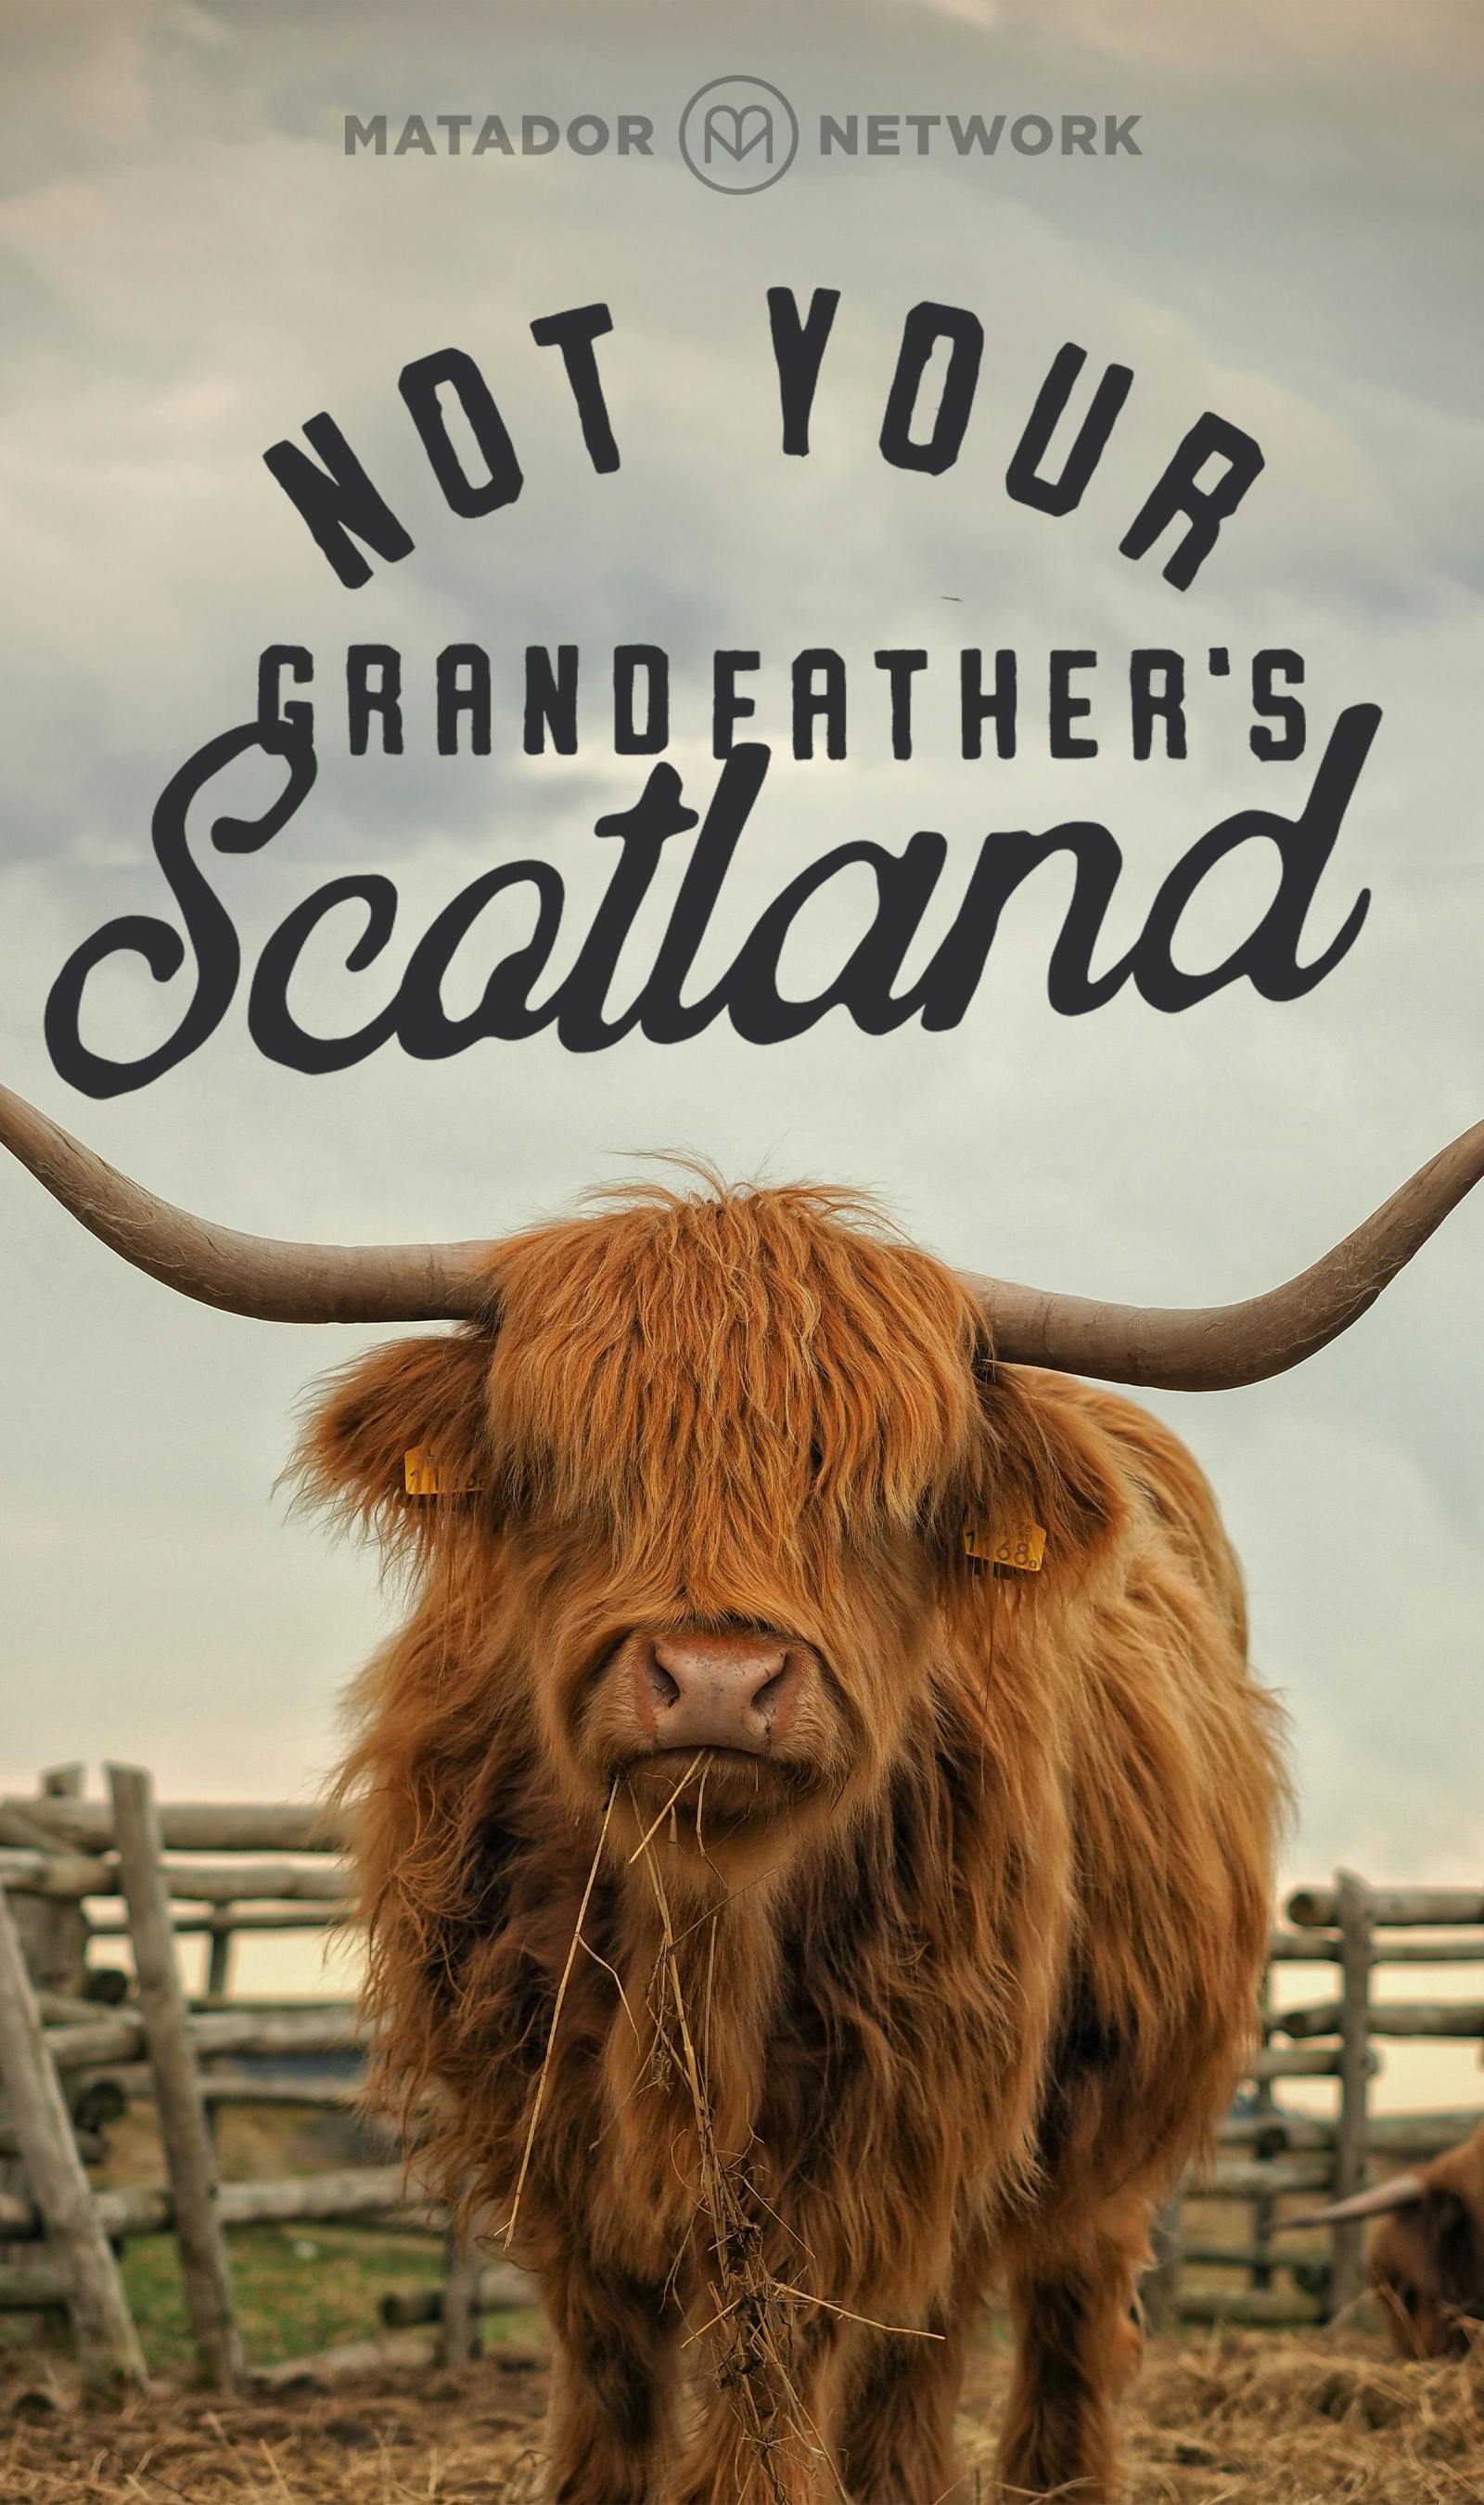 Not Your Grandfather's Scotland